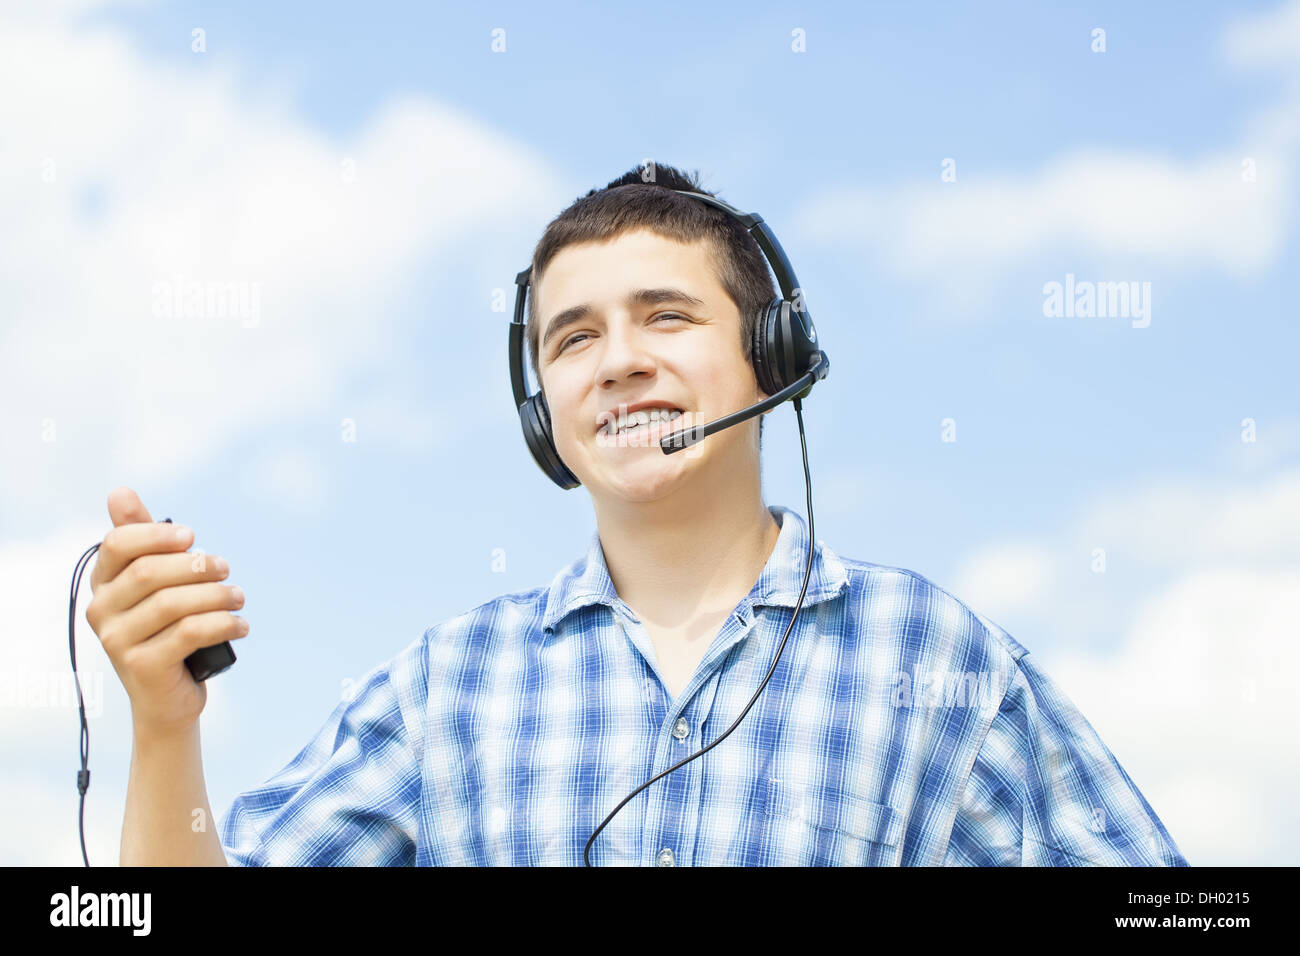 Smiling boy with headphones and Mic Stock Photo